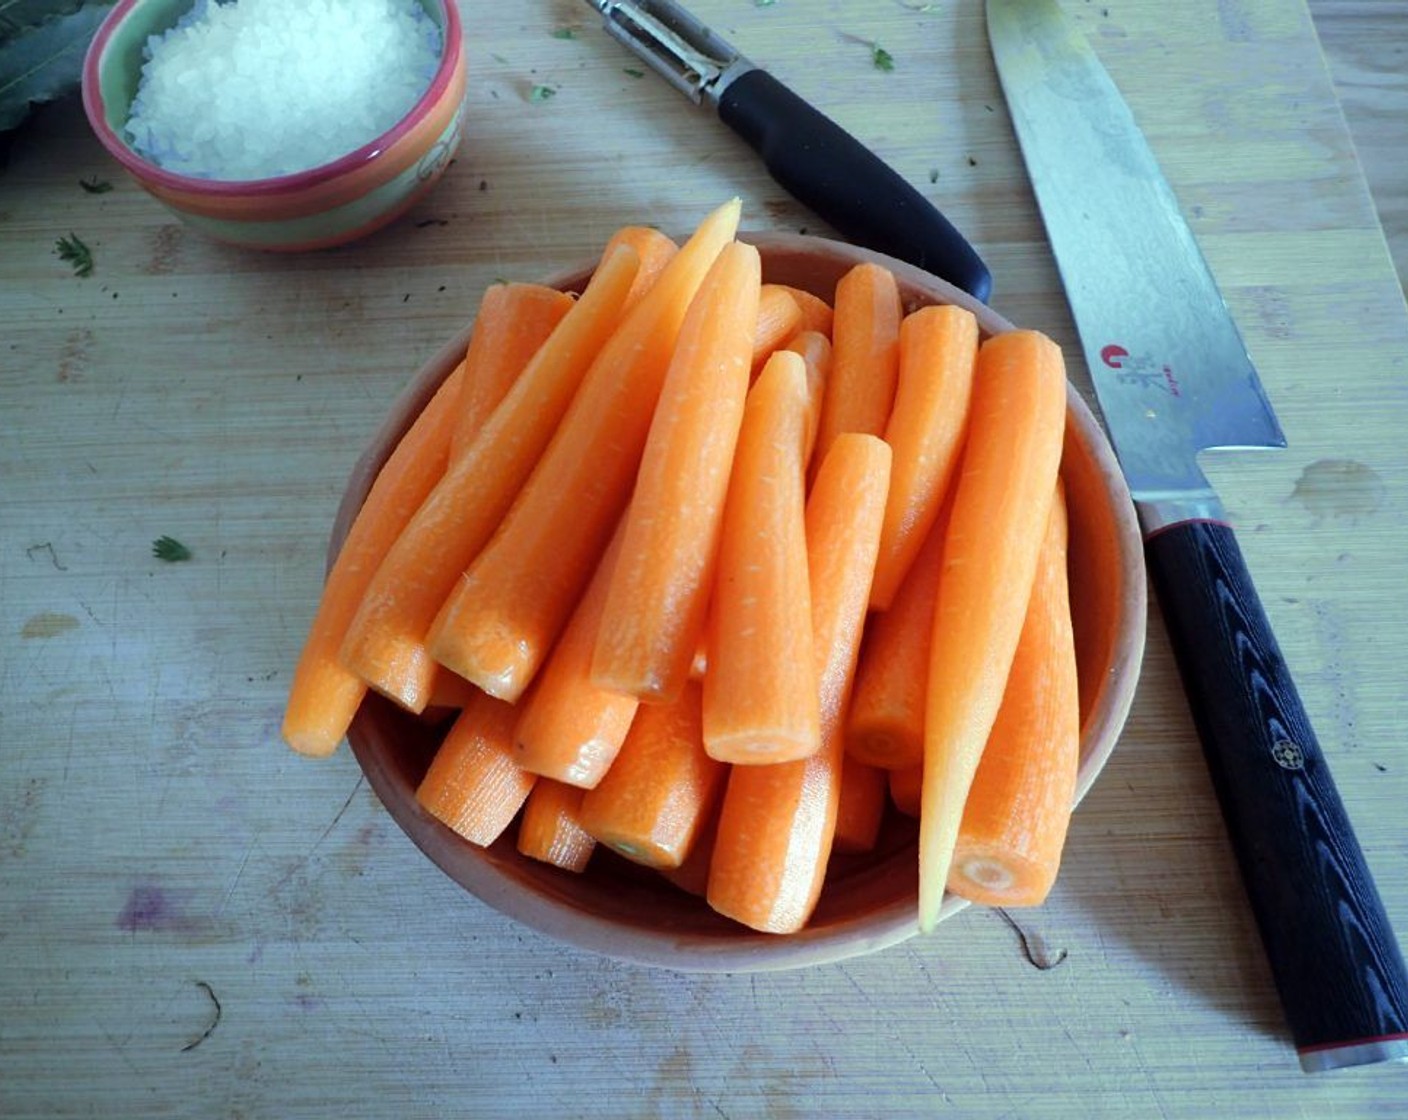 step 1 Wash and peel the Carrots (6 2/3 cups). Cut off the top and tip and slice them lengthwise. If possible avoid rewashing the carrots after having peeled them and place them on a clean surface.